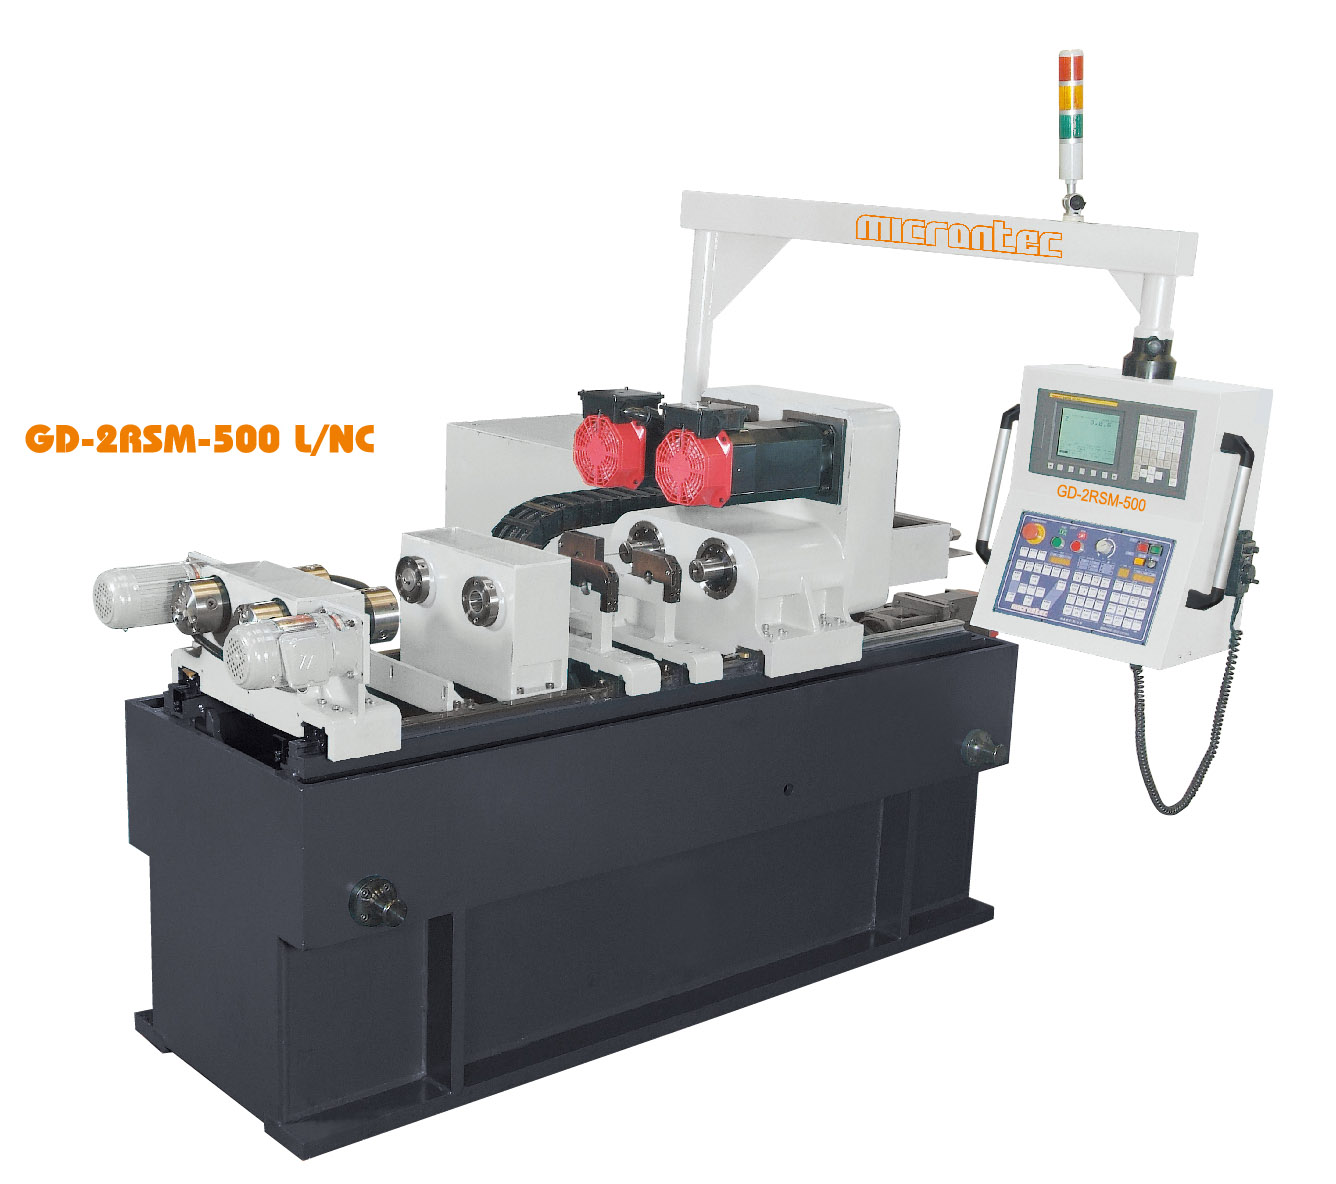 DOUBLE SPINDLE DRILLING SMALL HOLE TYPE – TAIL SEAT TURNING – CENTER OF A CIRCLE DRILLING MACHINE SY-GD-2RSM-300-L/NC